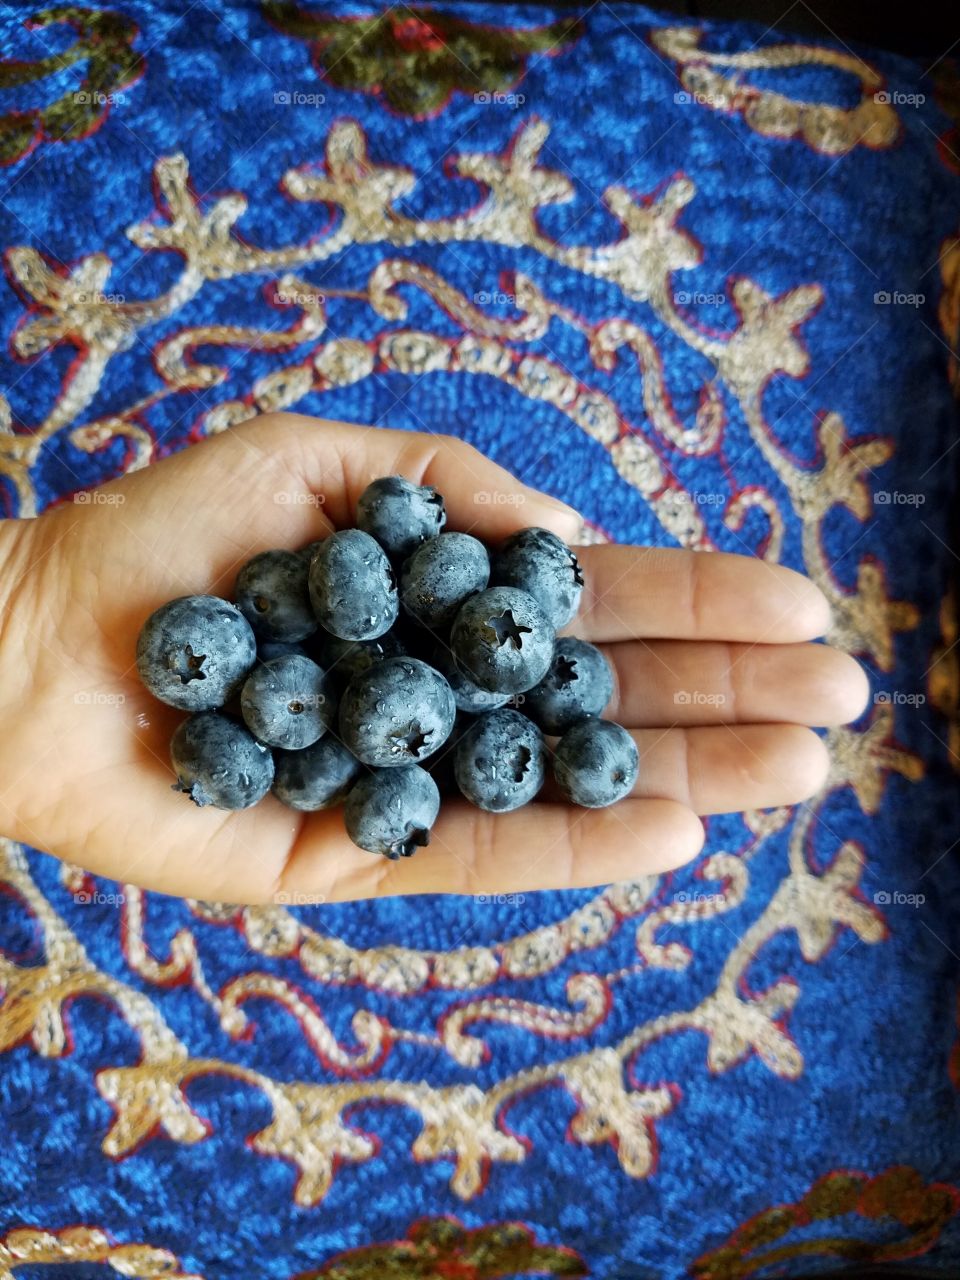 Human hand holding blueberries